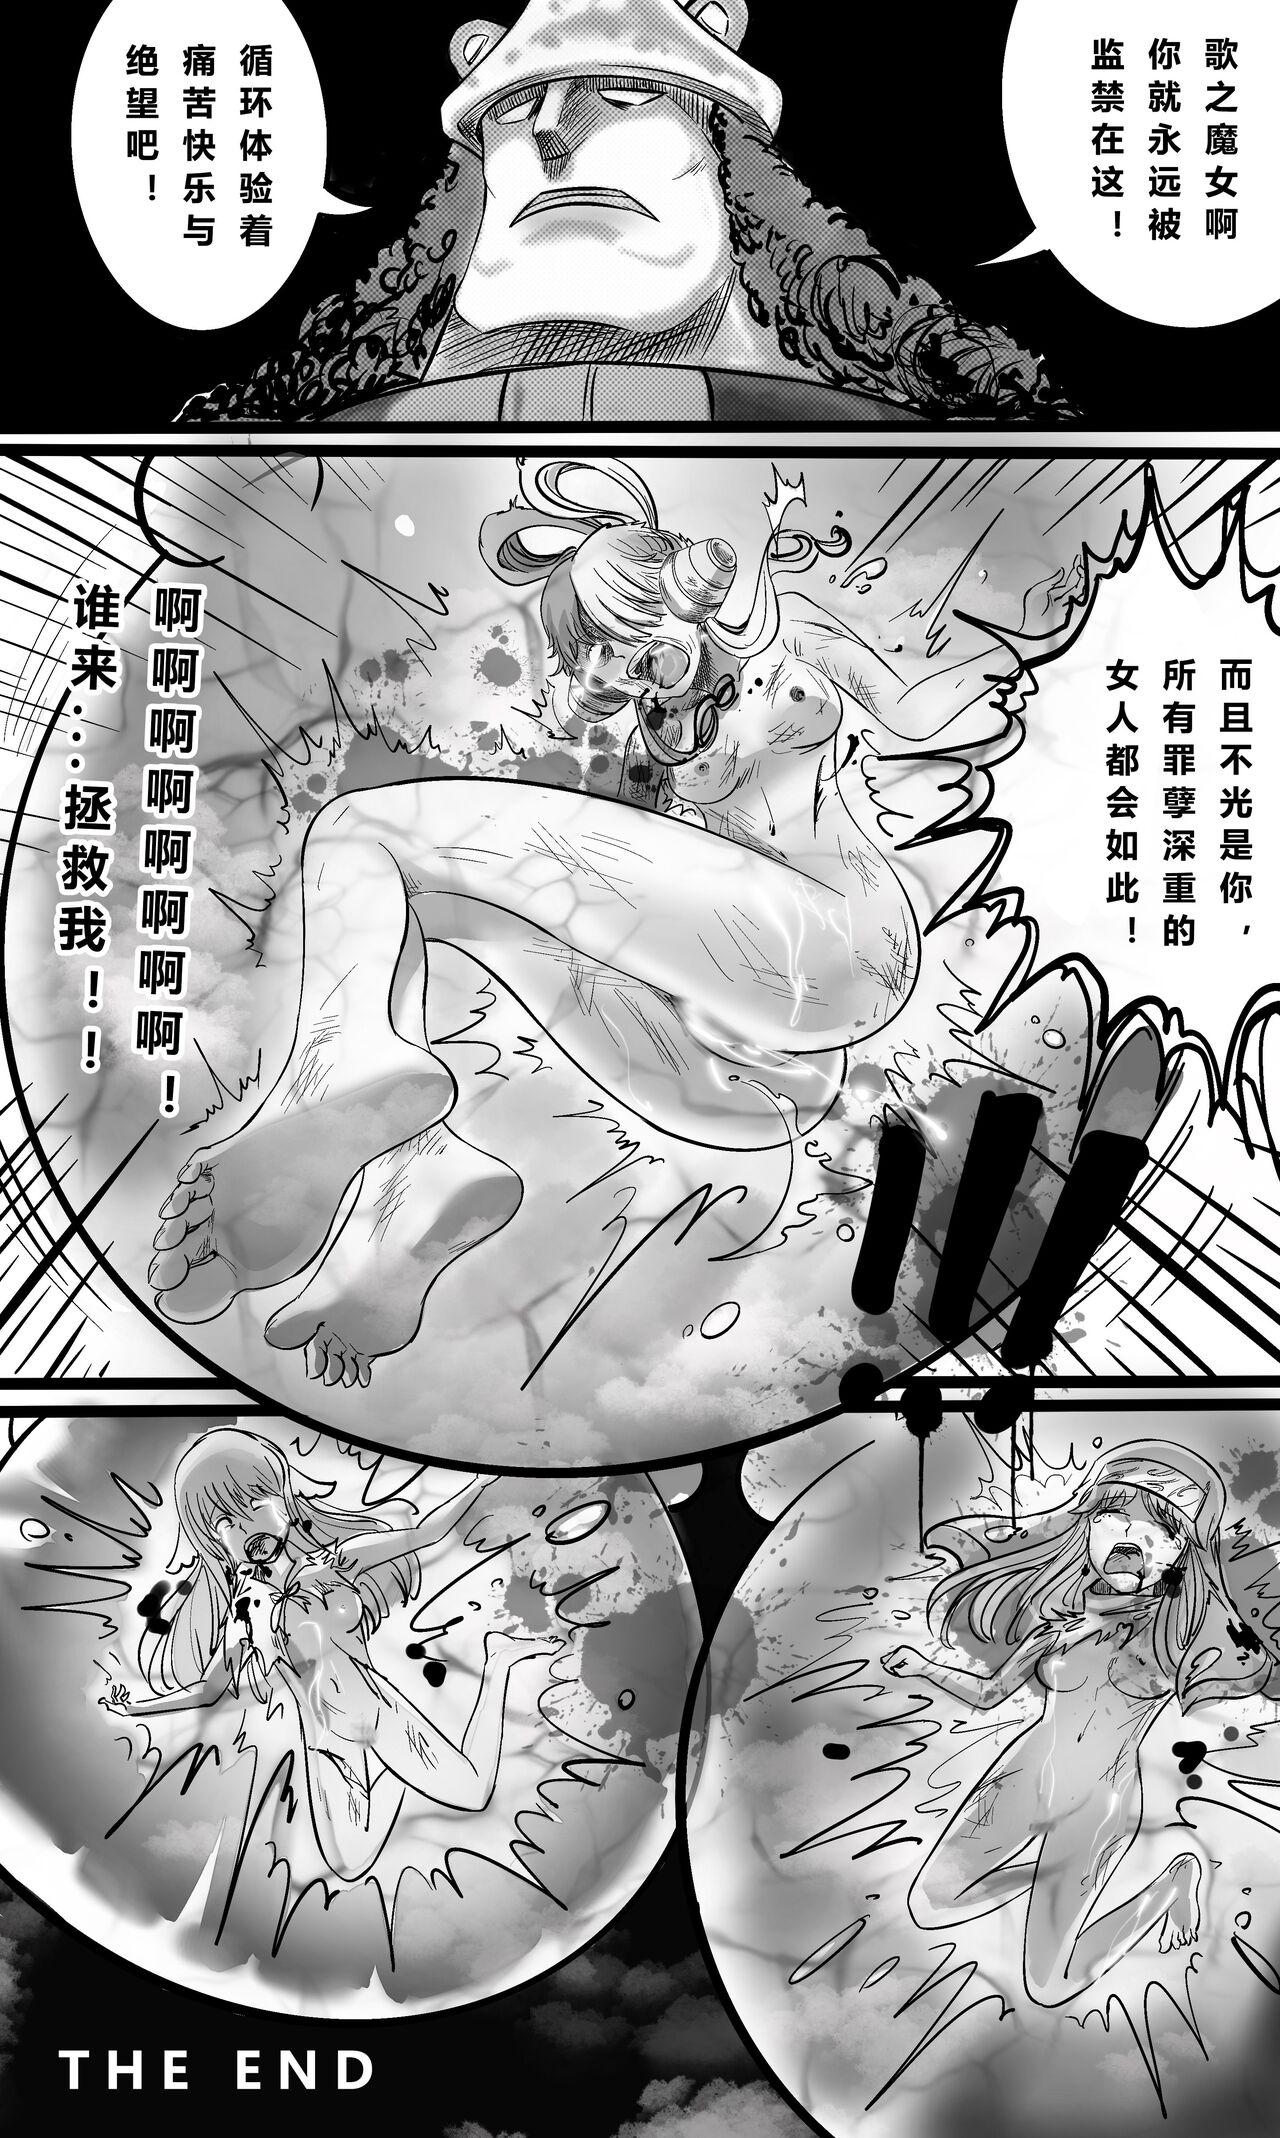 Nice Tits ONE PIECE 歌之魔女的监禁篇 - One piece Rough Porn - Page 10